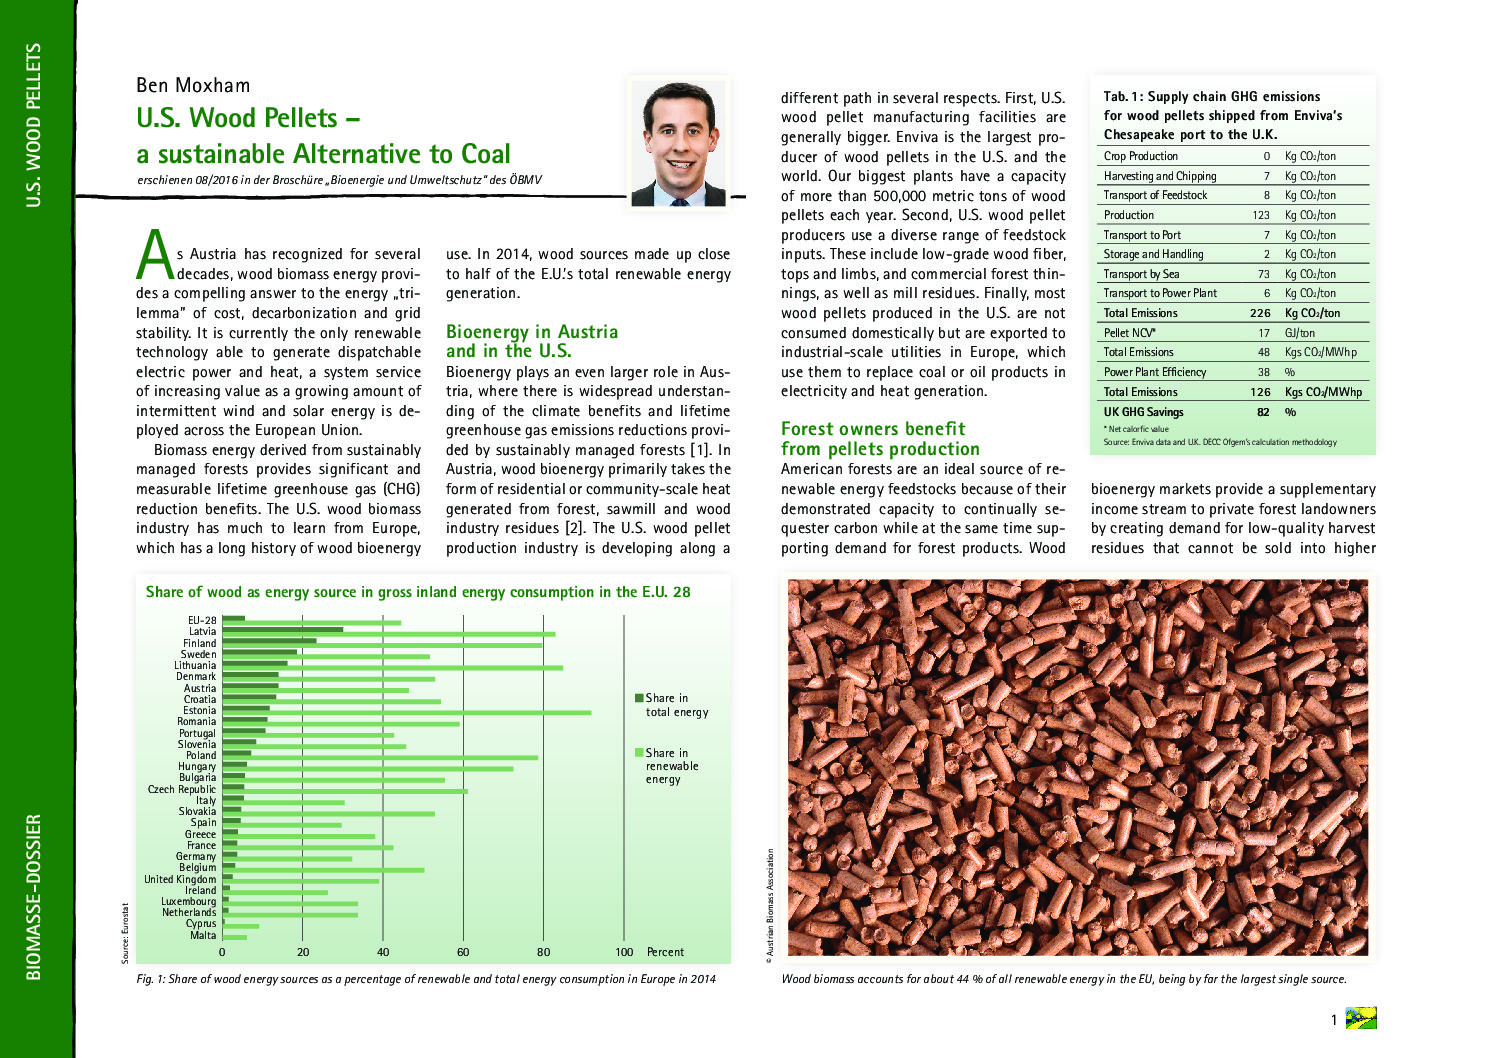 U.S. Wood Pellets – a sustainable alternative to coal